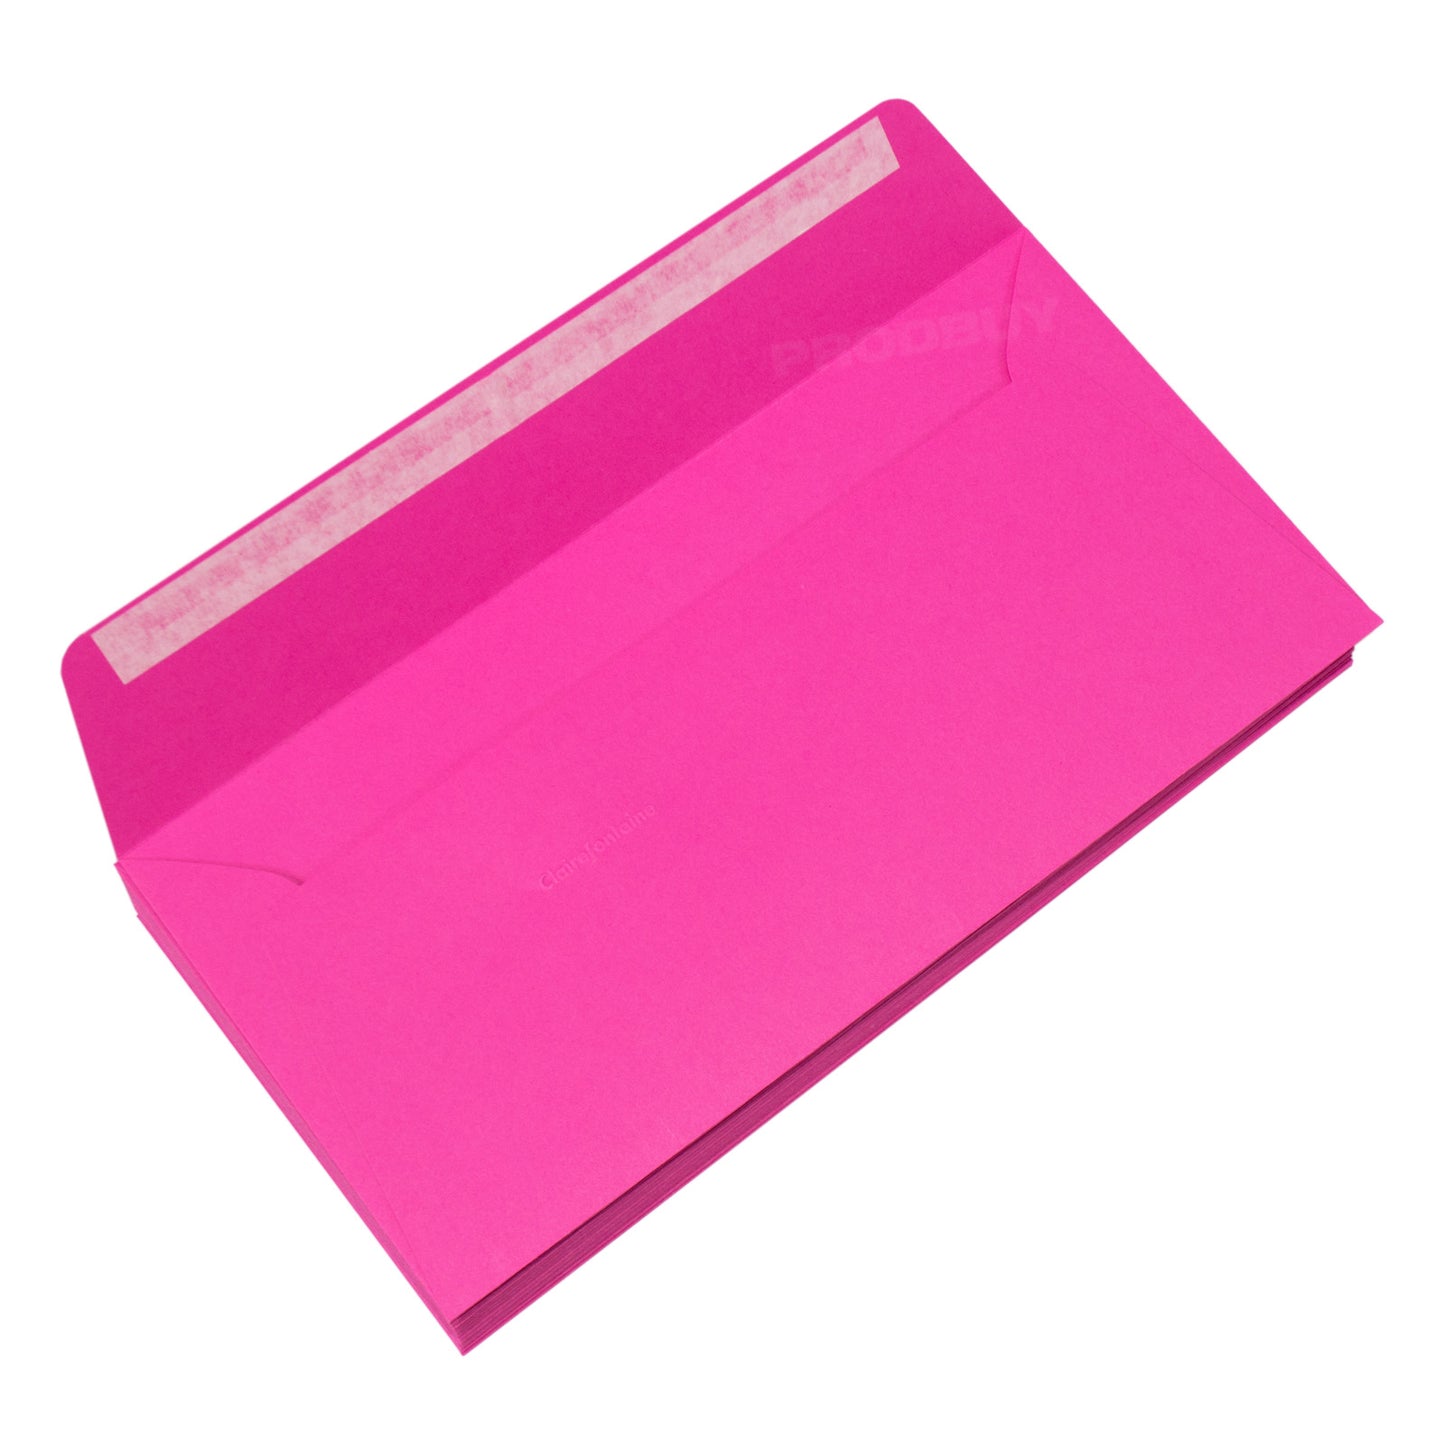 Set of 40 High Quality Plain DL Envelopes 120gsm with 'Rose Fuchsia' Pink Colour